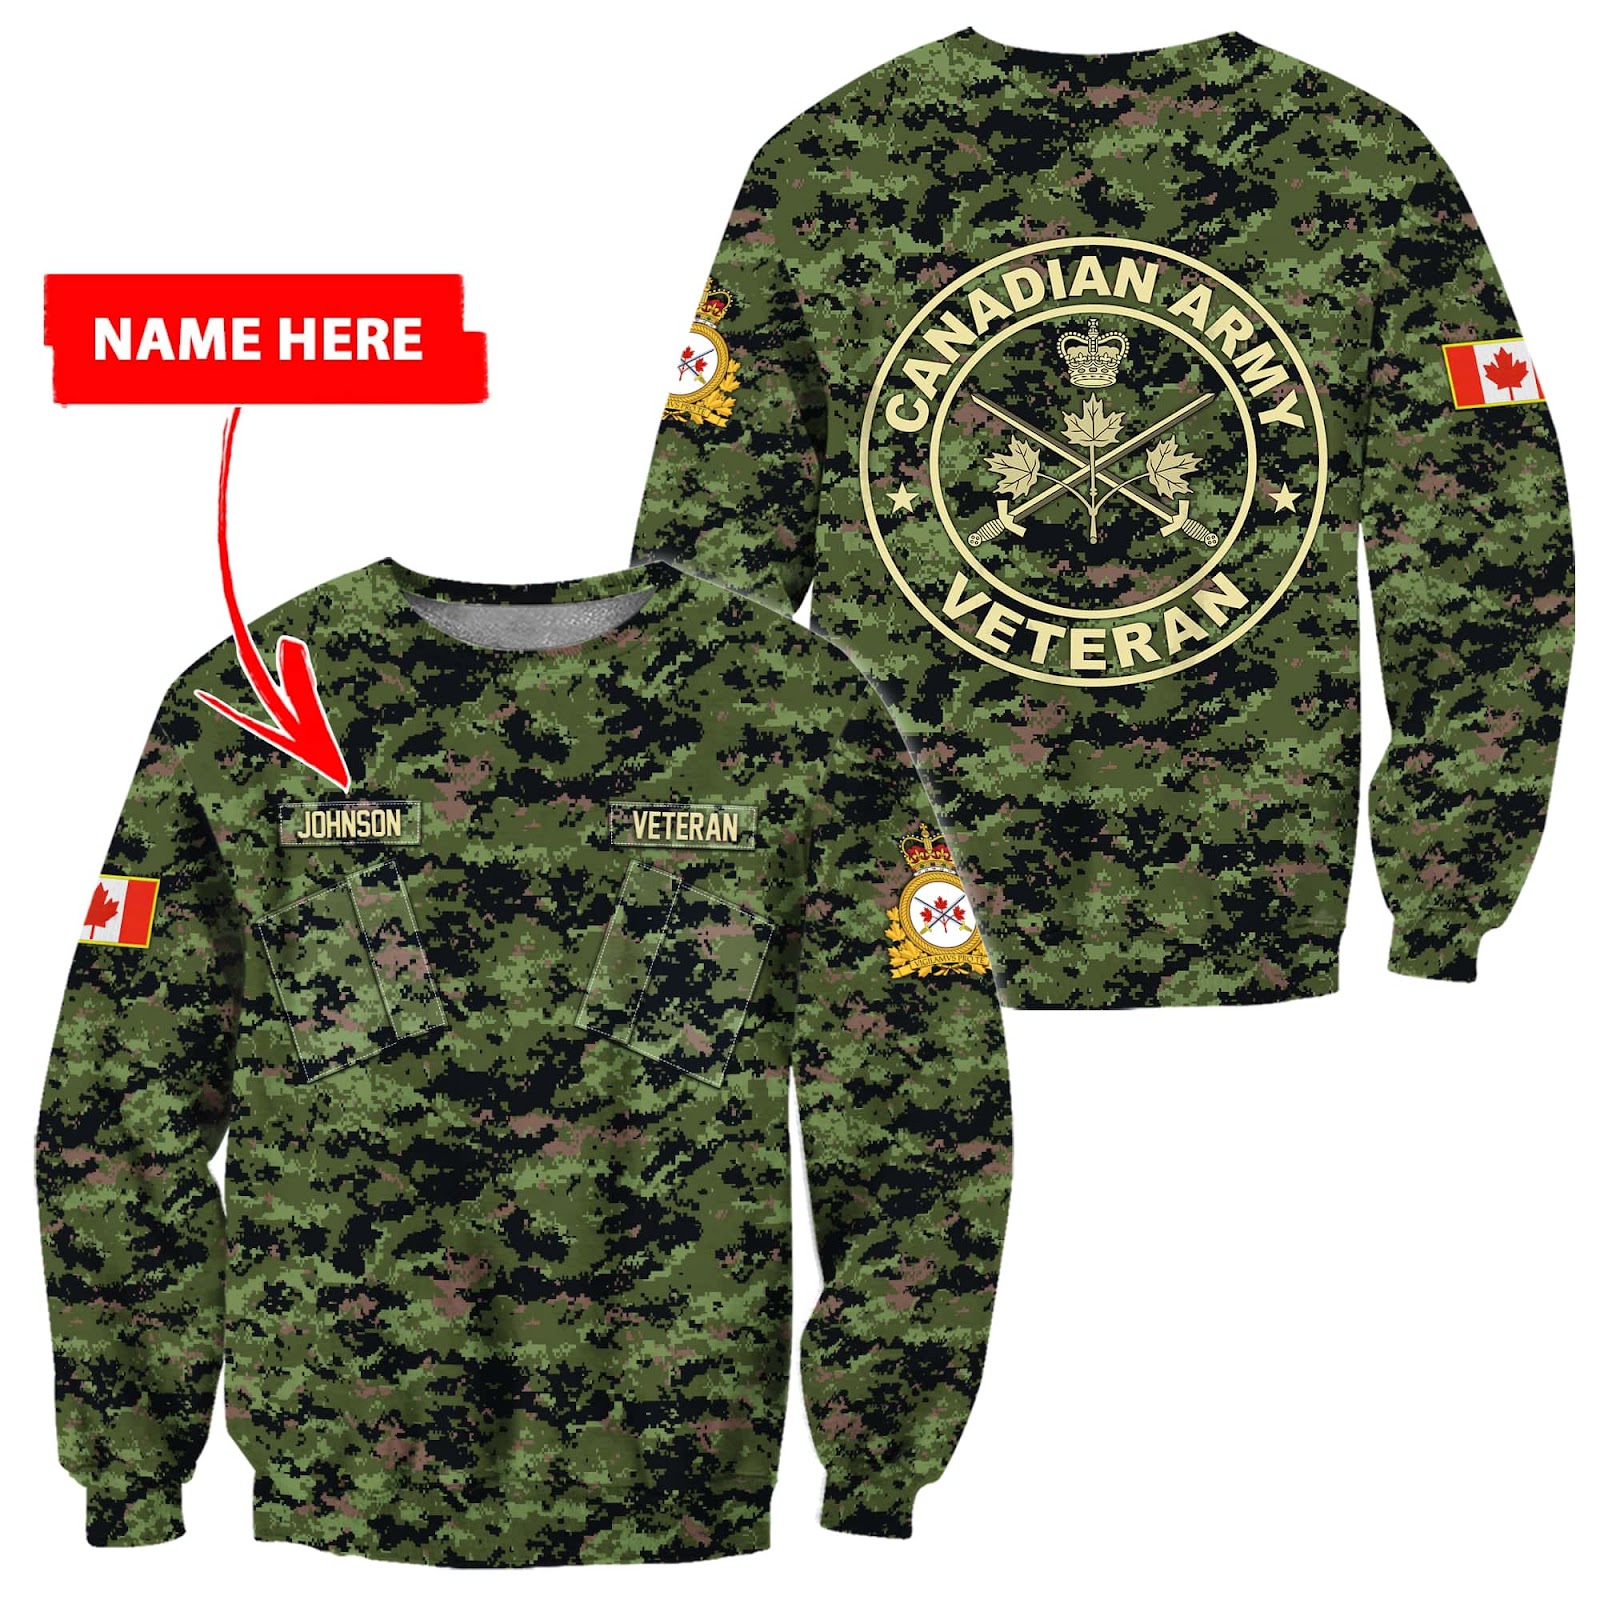 personalized name canada all over printed unisex clothes lh987 long sleeved shirt.jpg